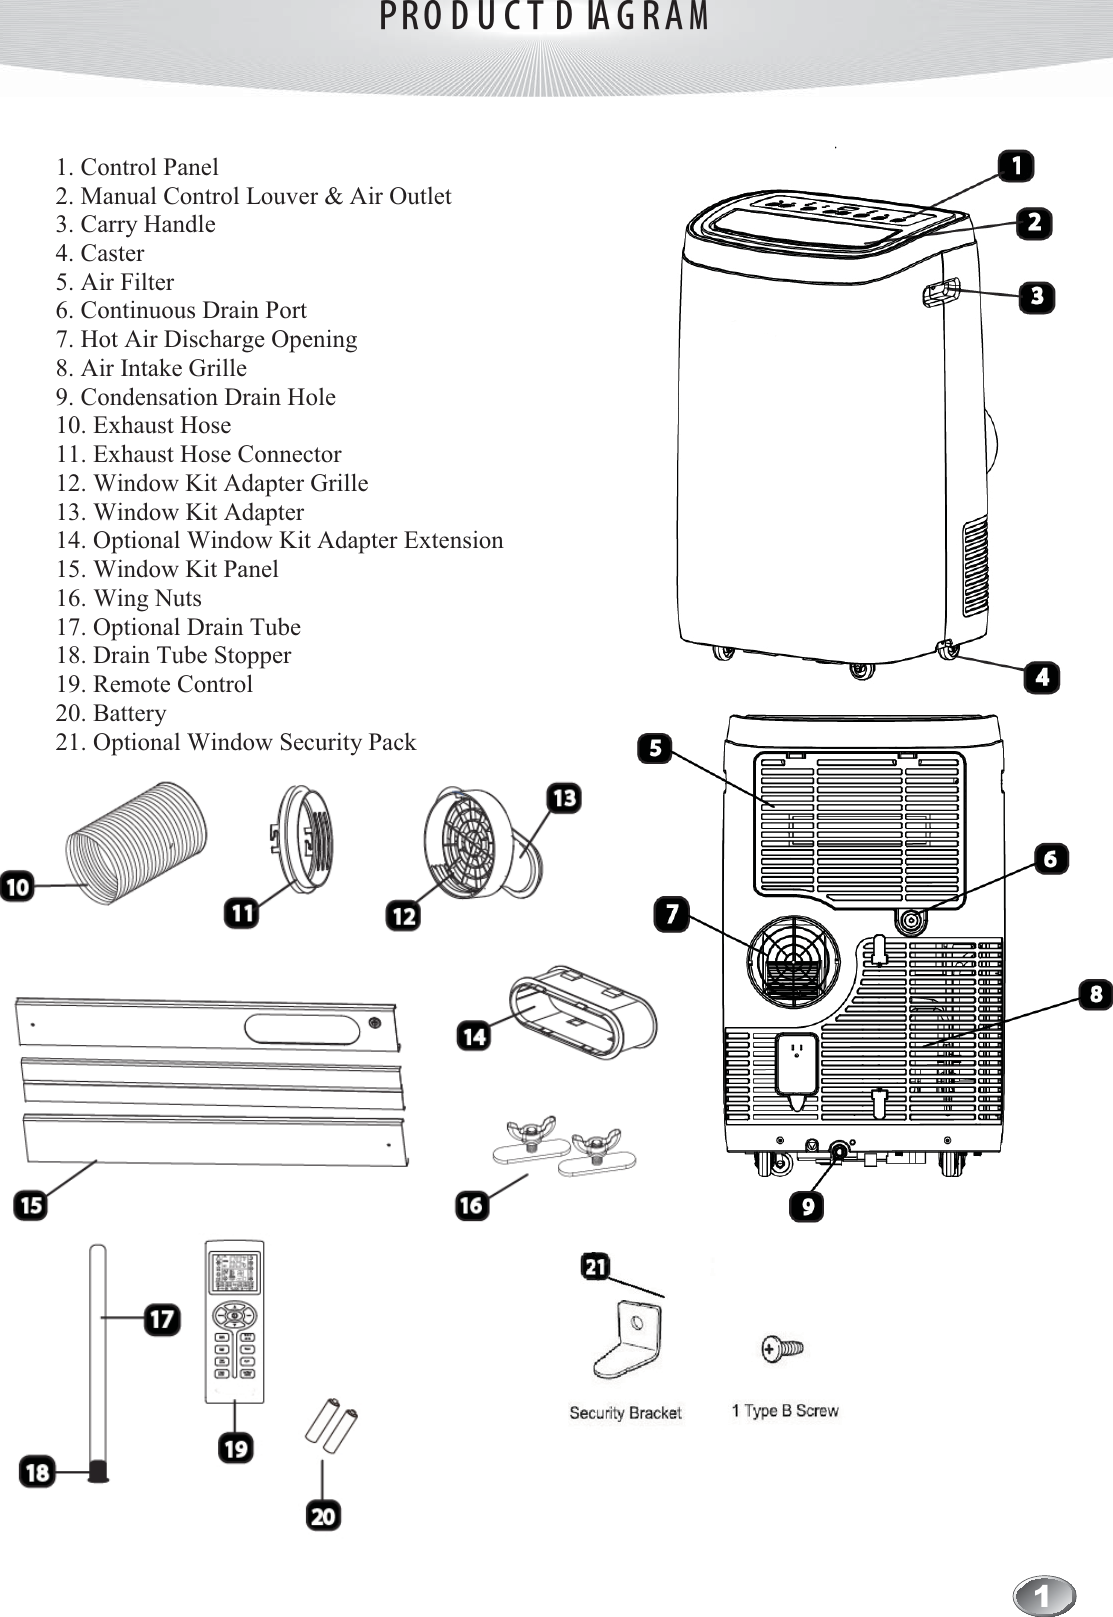    1. Control Panel 2. Manual Control Louver &amp; Air Outlet 3. Carry Handle 4. Caster 5. Air Filter 6. Continuous Drain Port 7. Hot Air Discharge Opening 8. Air Intake Grille 9. Condensation Drain Hole 10. Exhaust Hose 11. Exhaust Hose Connector 12. Window Kit Adapter Grille 13. Window Kit Adapter  14. Optional Window Kit Adapter Extension 15. Window Kit Panel 16. Wing Nuts 17. Optional Drain Tube 18. Drain Tube Stopper 19. Remote Control 20. Battery 21. Optional Window Security Pack  1ＰＲＯ Ｄ ＵＣＴ　ＤＩＡＧＲＡＭ